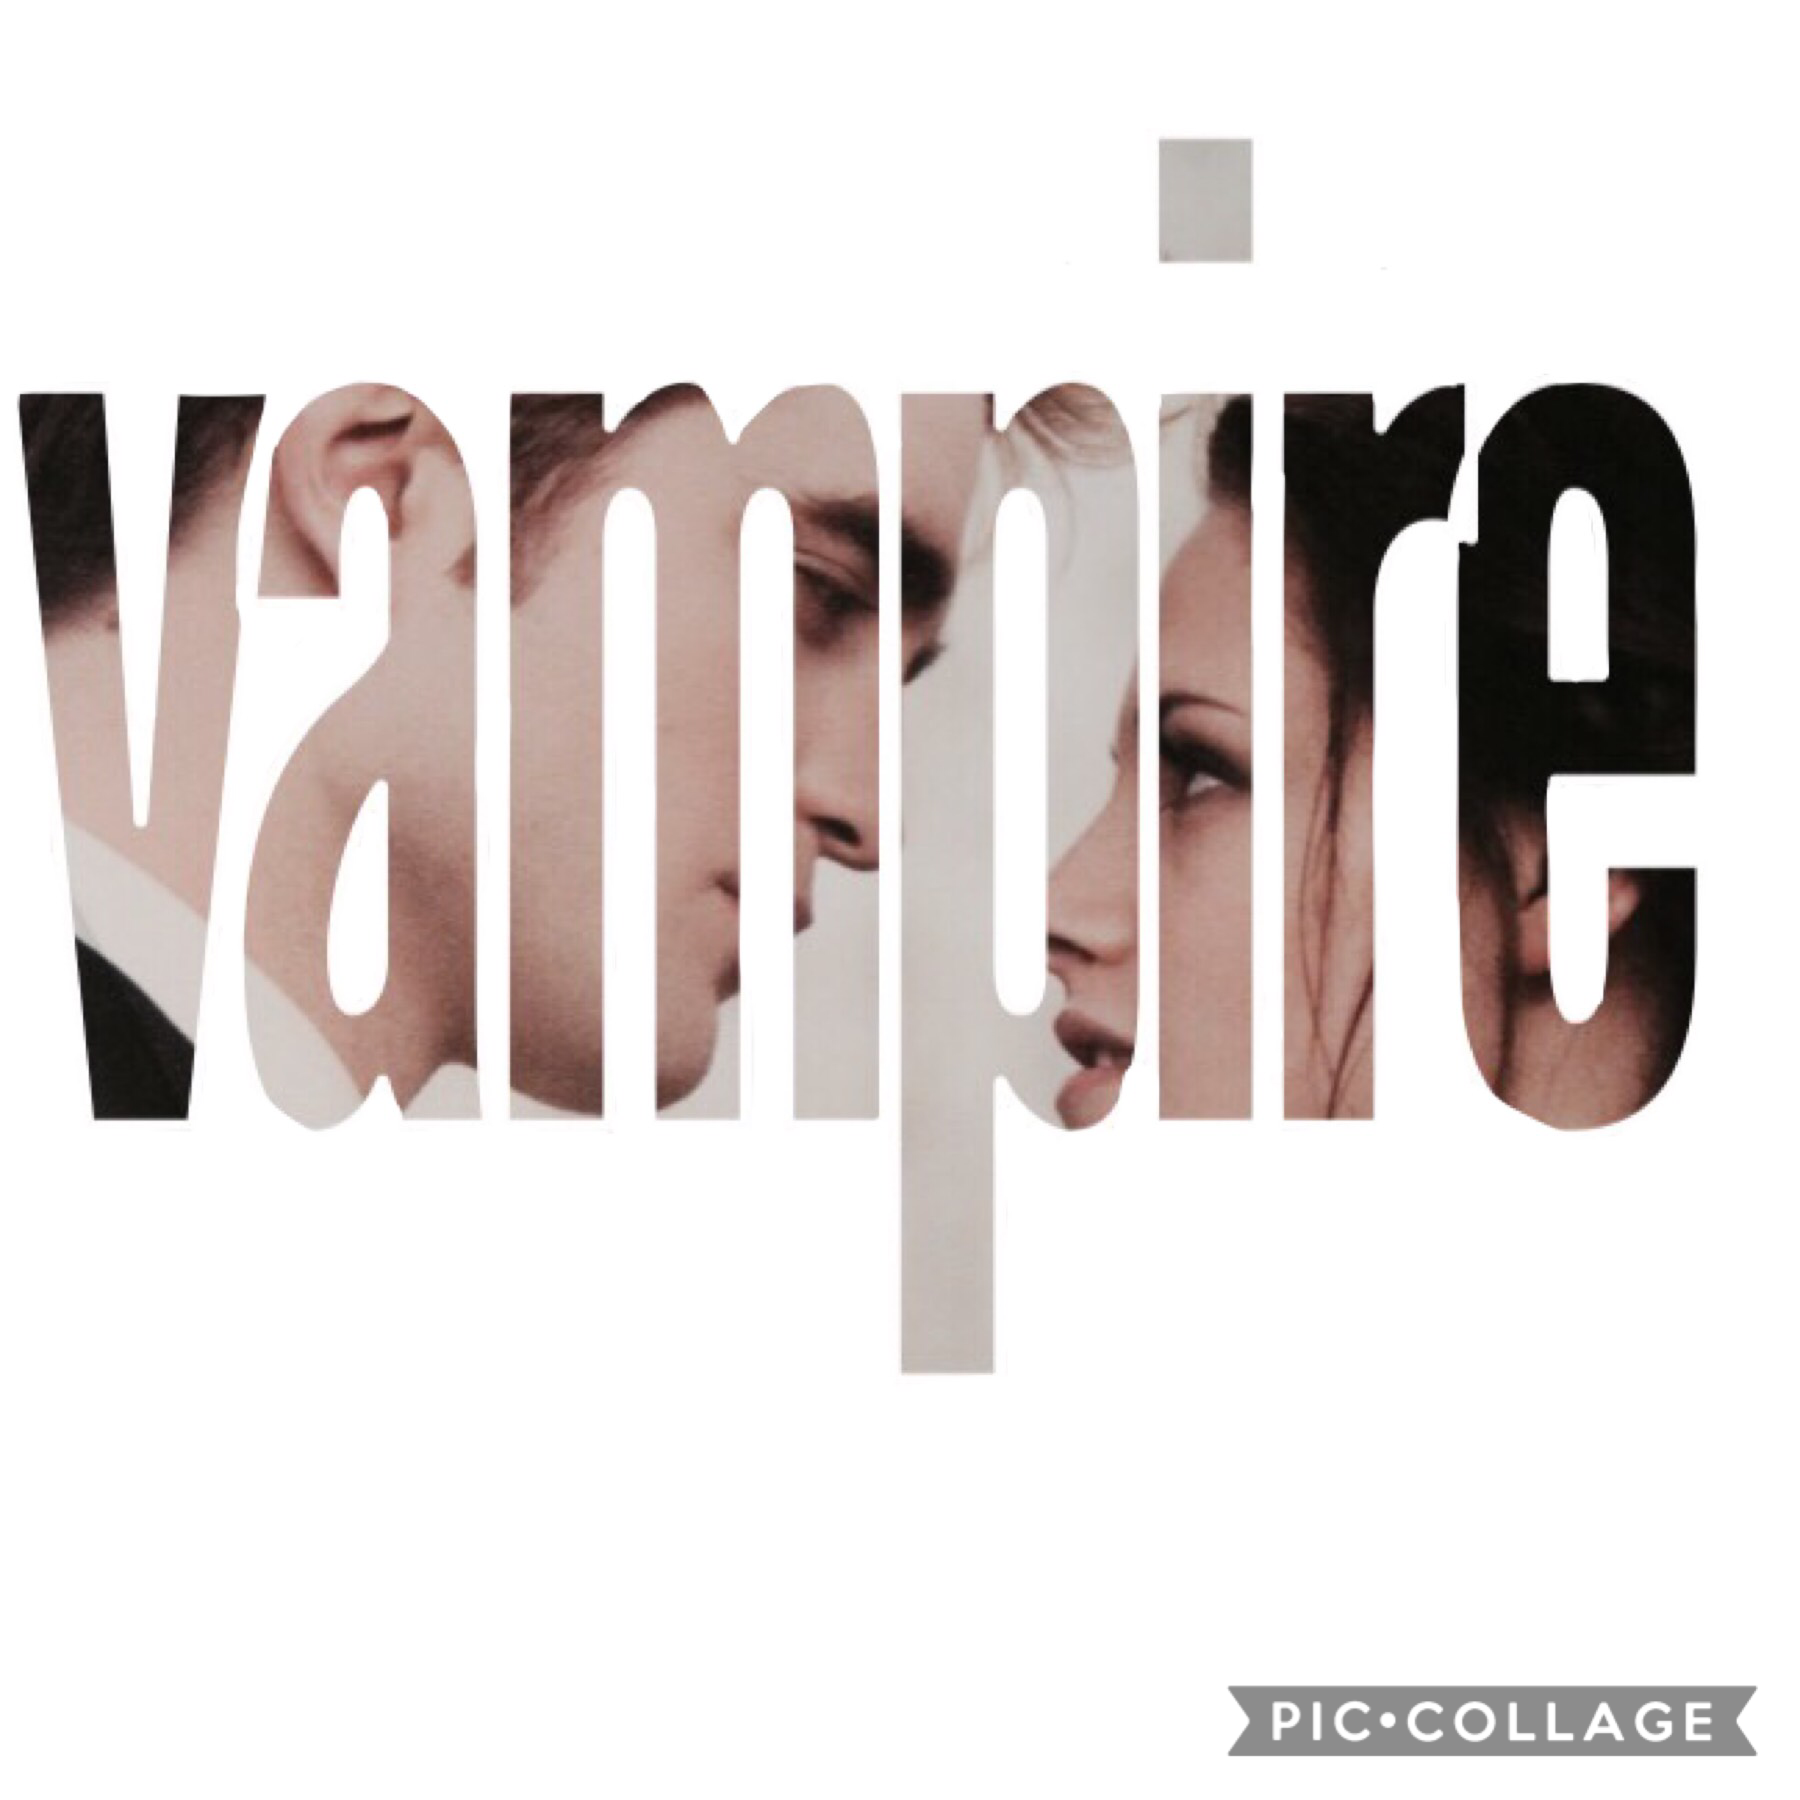 tAp
🎃Halloween’s coming up soon and my friend -only-positivity- has a Halloween contest on her acc! Go check it out!!!🎃
QOTD: 🧛🏻‍♂️ or 🐺?
AOTD: 🧛🏻‍♂️!!!!